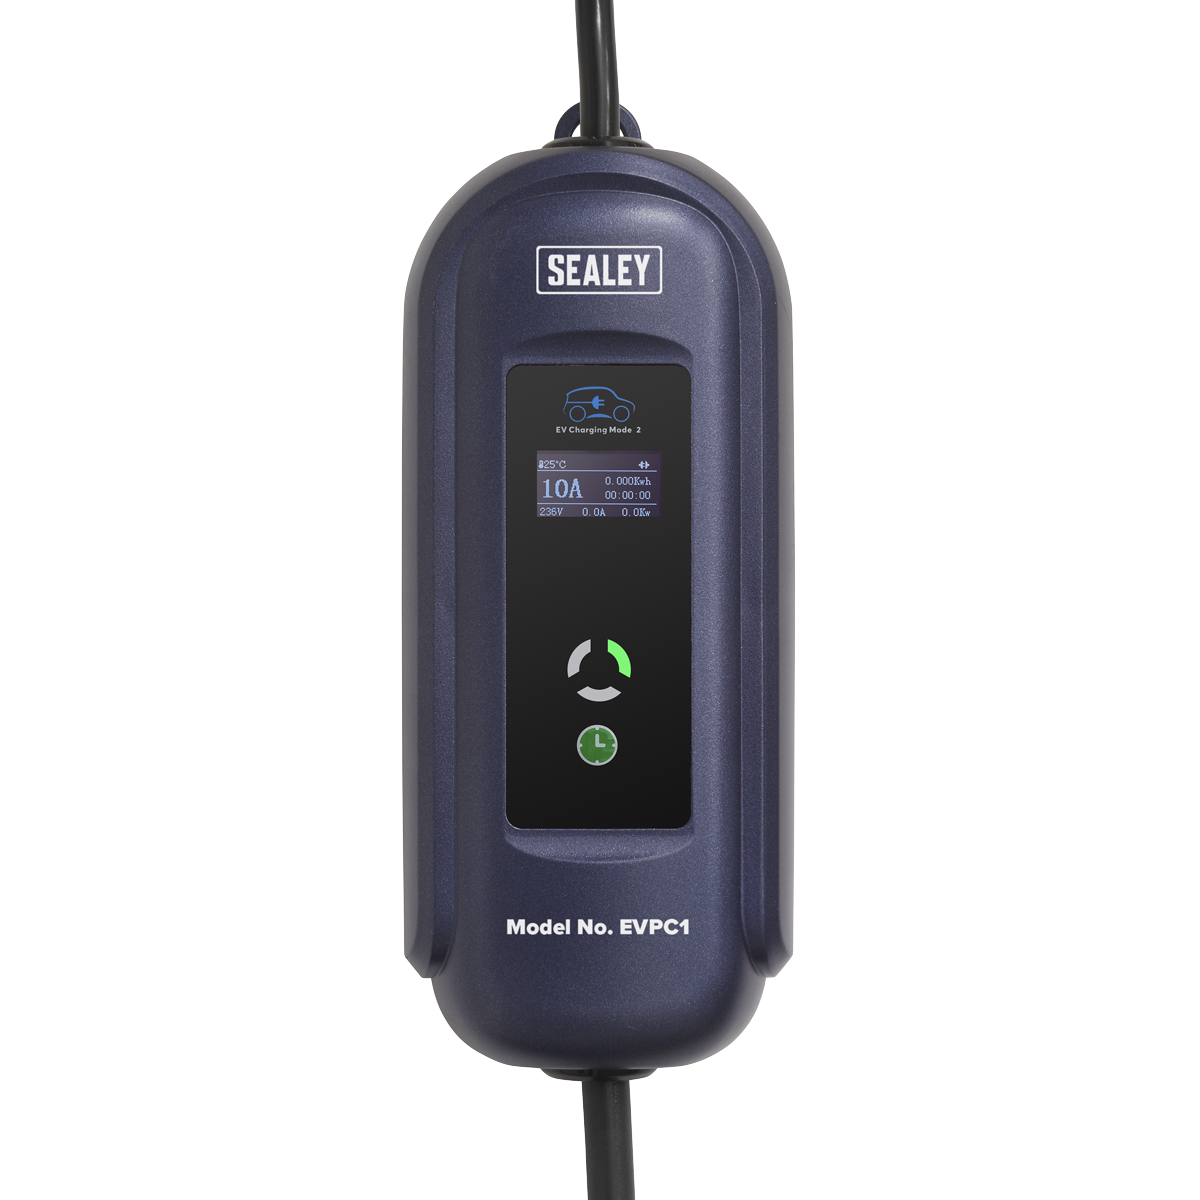 Sealey 10A Type 1 to UK 3-Pin Plug Portable EV Charger - 5m Cable EVPC1